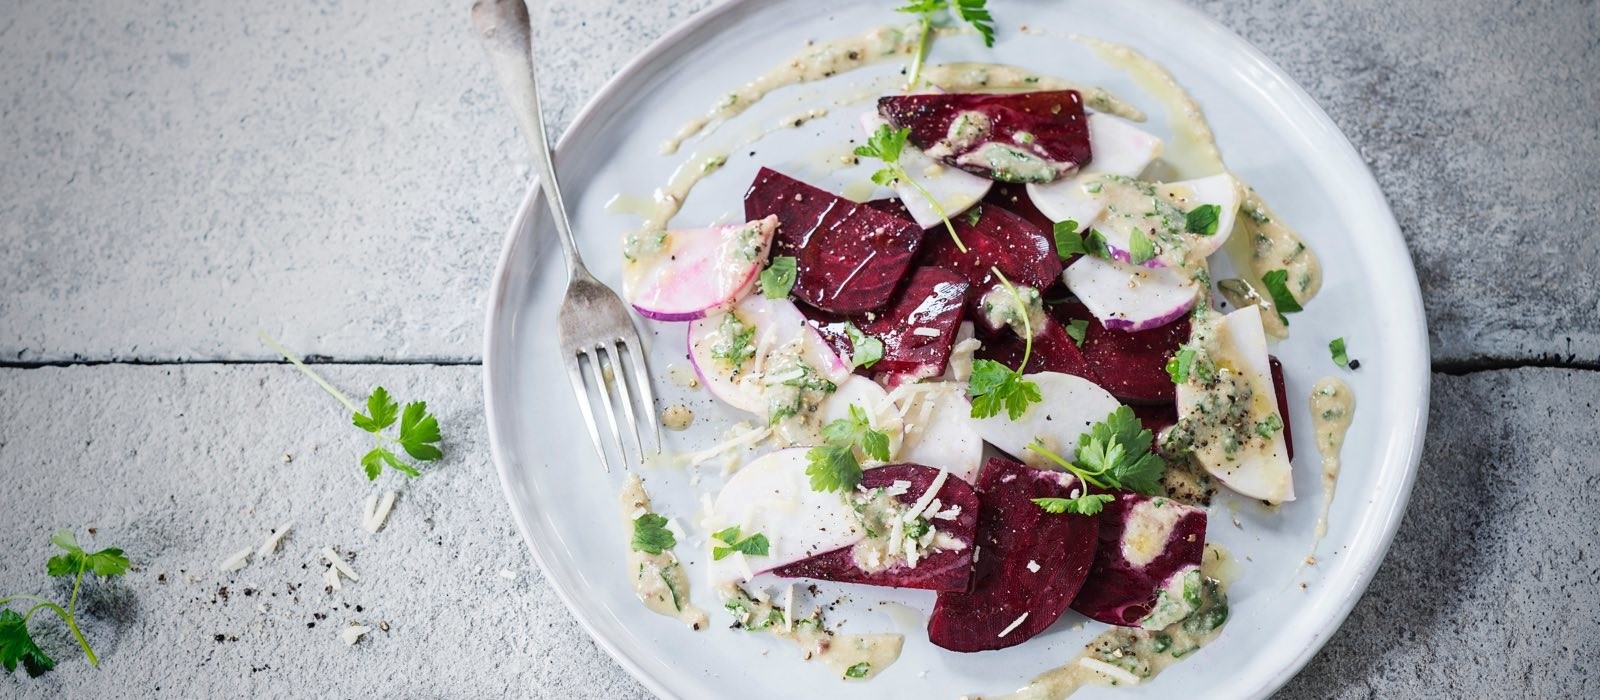 Import-Recipe - Turnip and beetroot carpaccio with anchovy and almonds pesto sauce